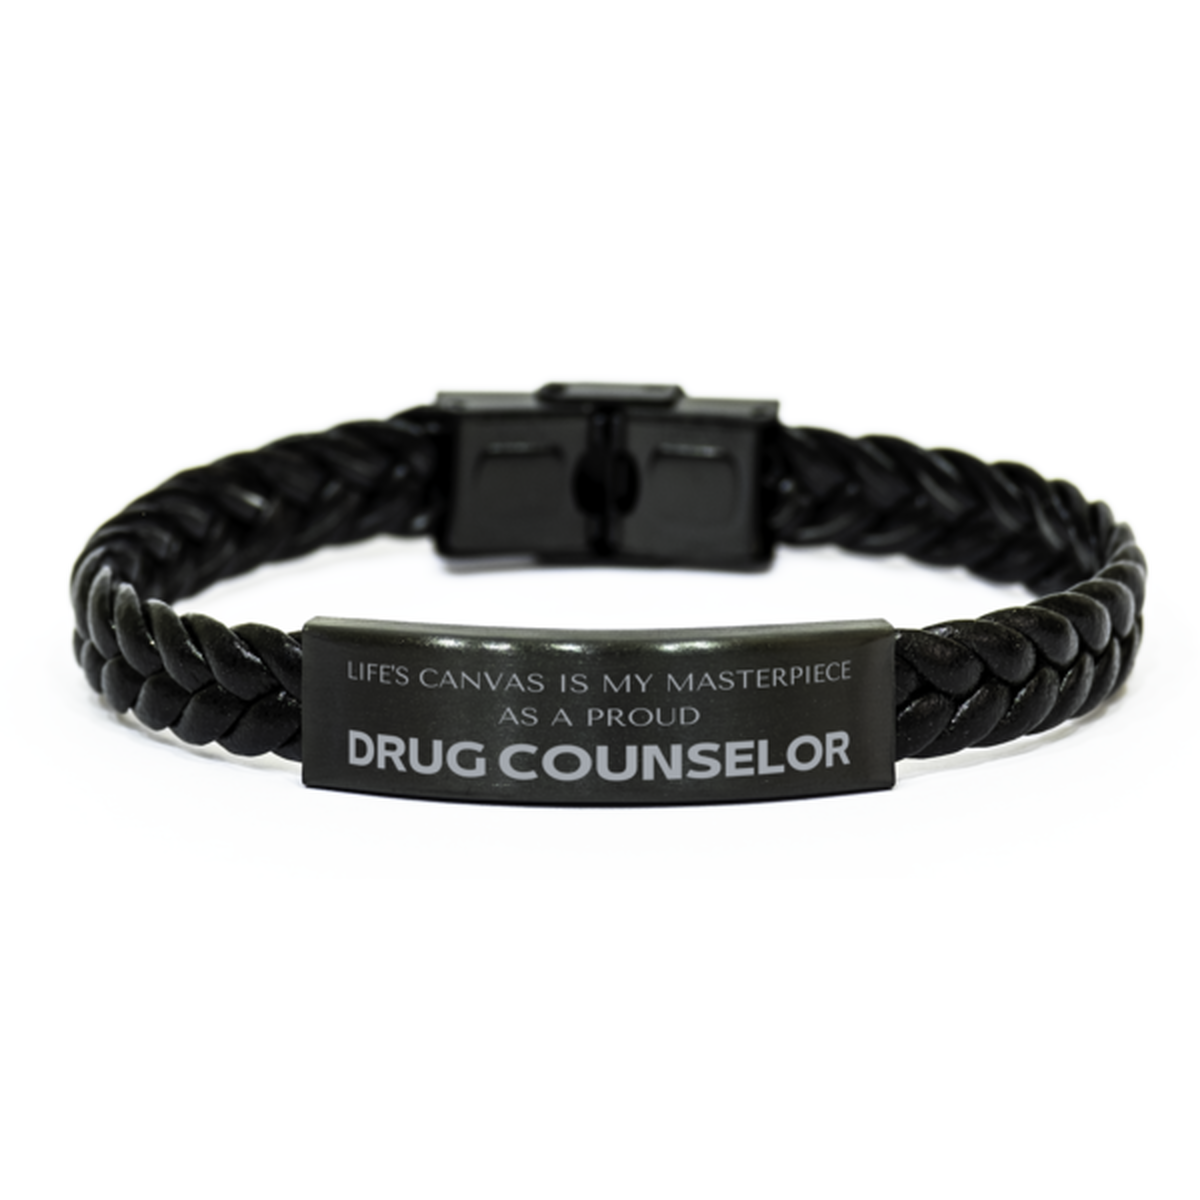 Proud Drug Counselor Gifts, Life's canvas is my masterpiece, Epic Birthday Christmas Unique Braided Leather Bracelet For Drug Counselor, Coworkers, Men, Women, Friends